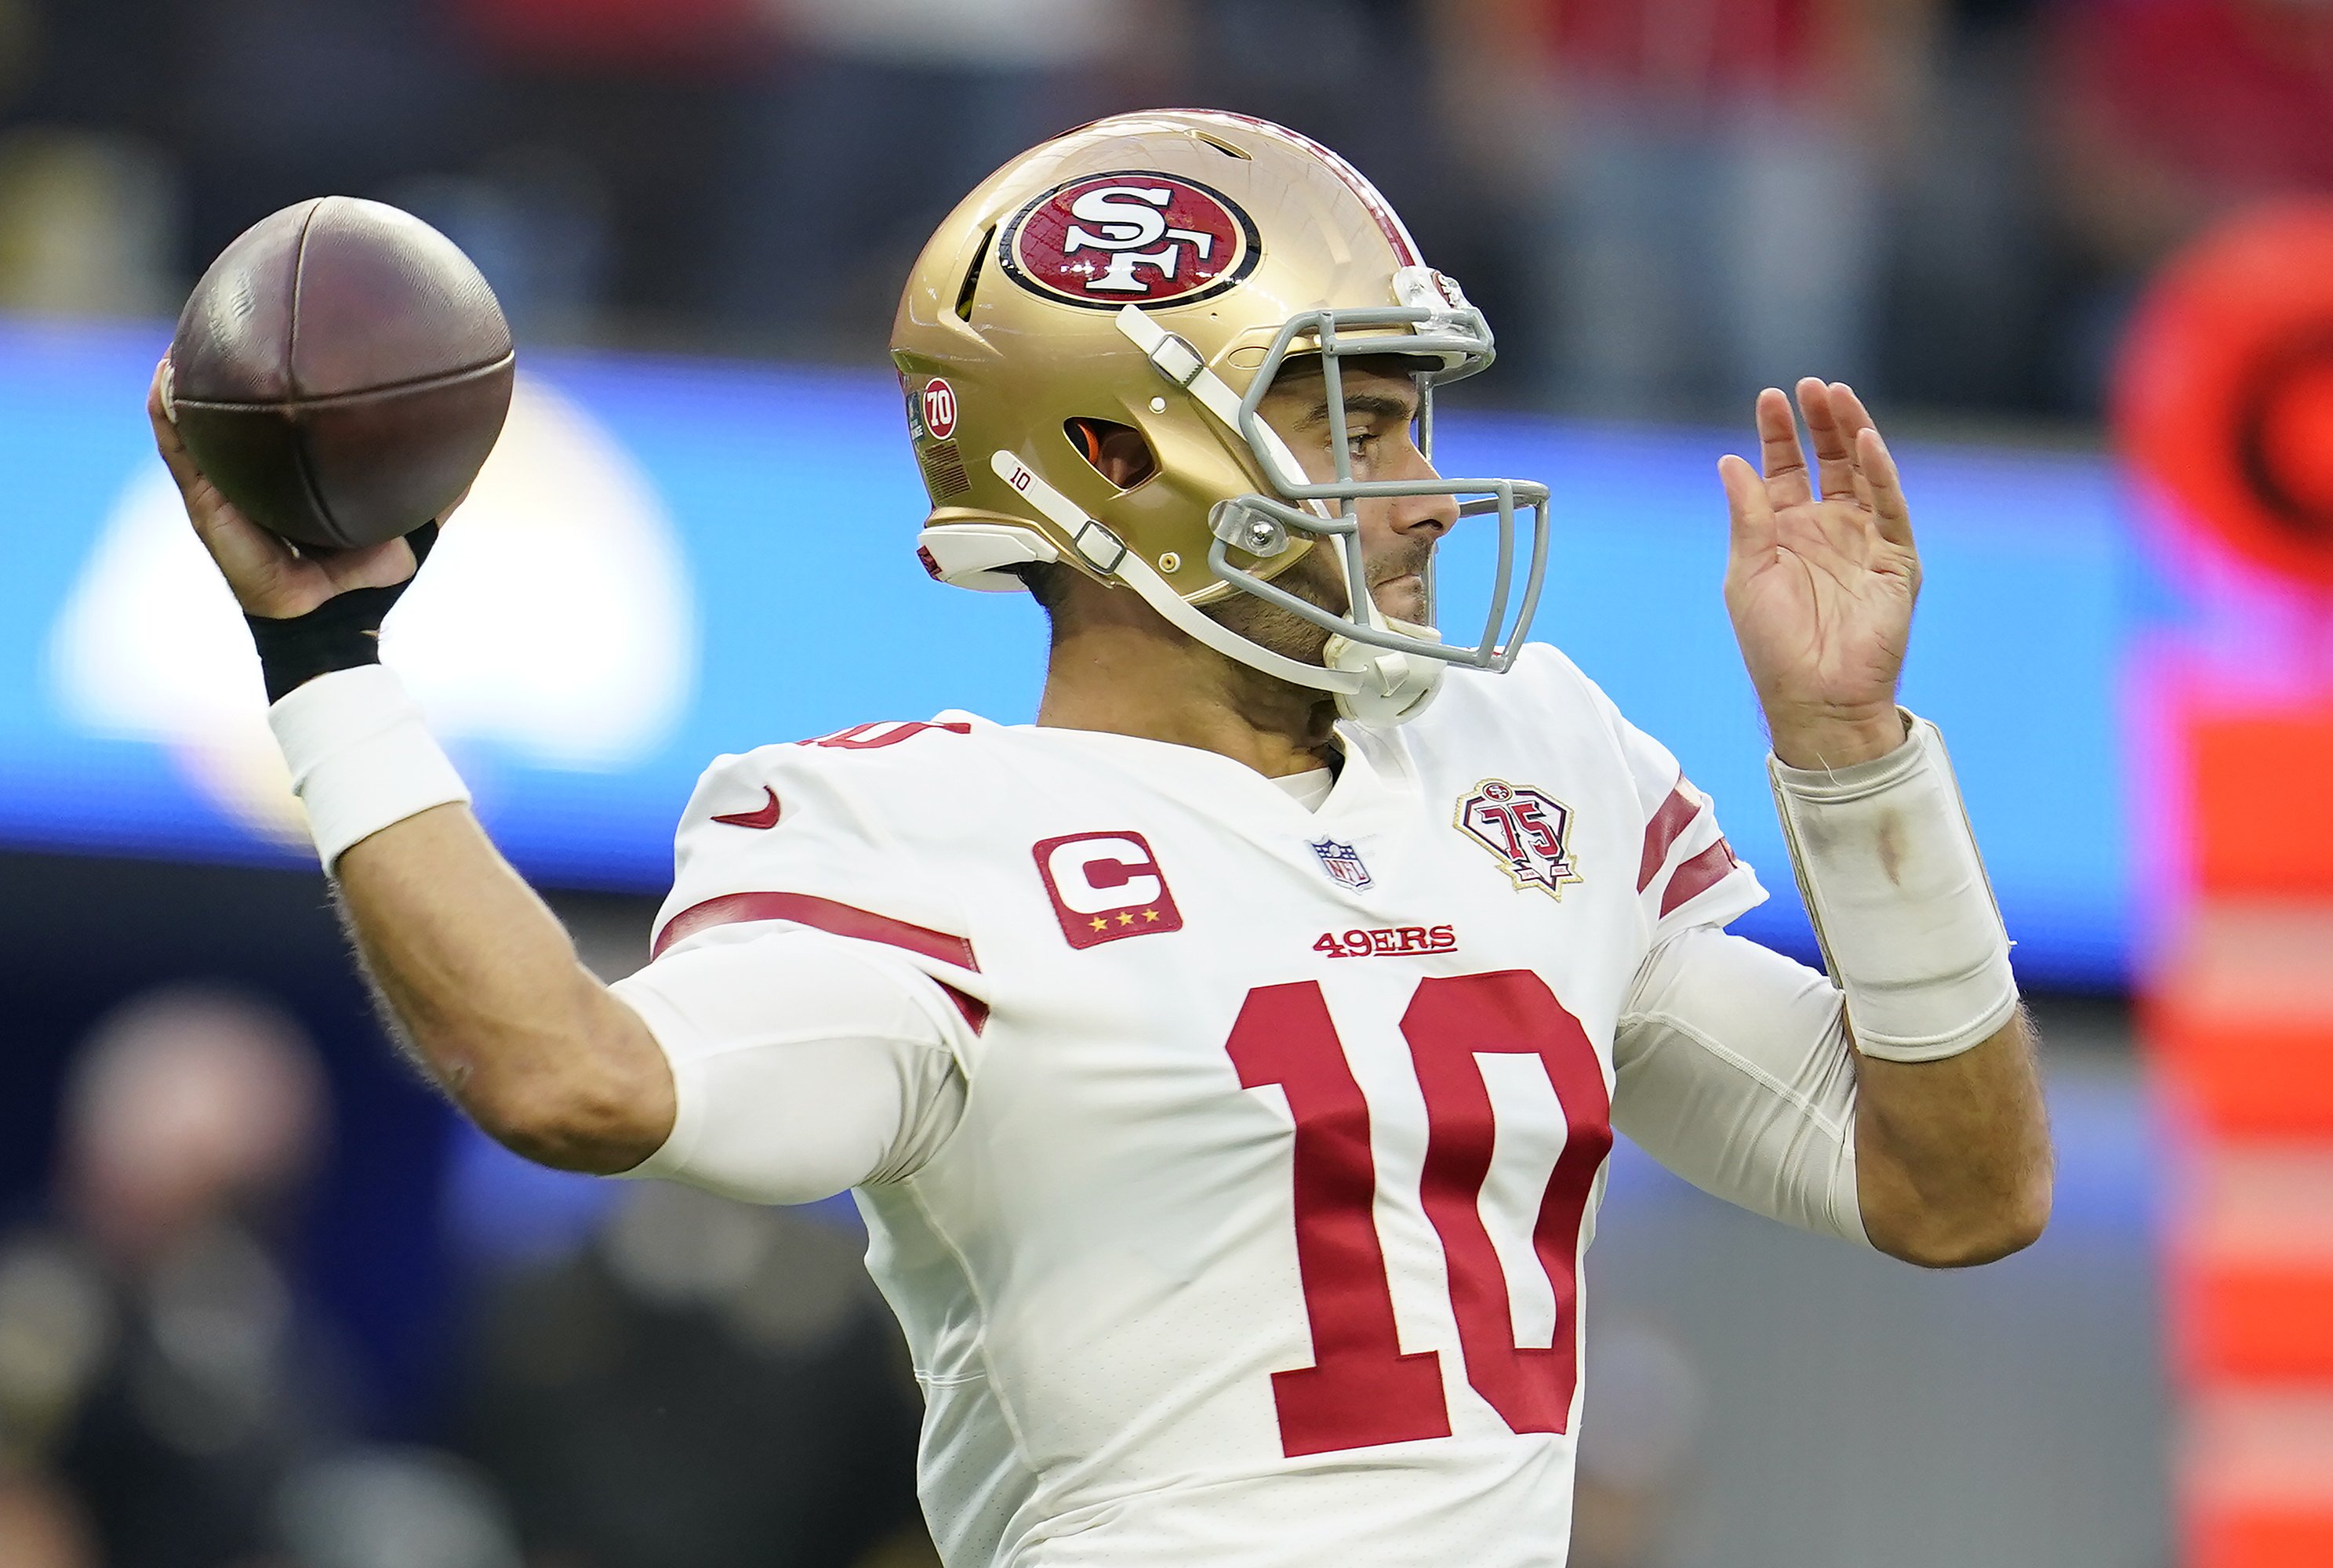 Where will Jimmy Garoppolo play in 2023? Potential landing spots